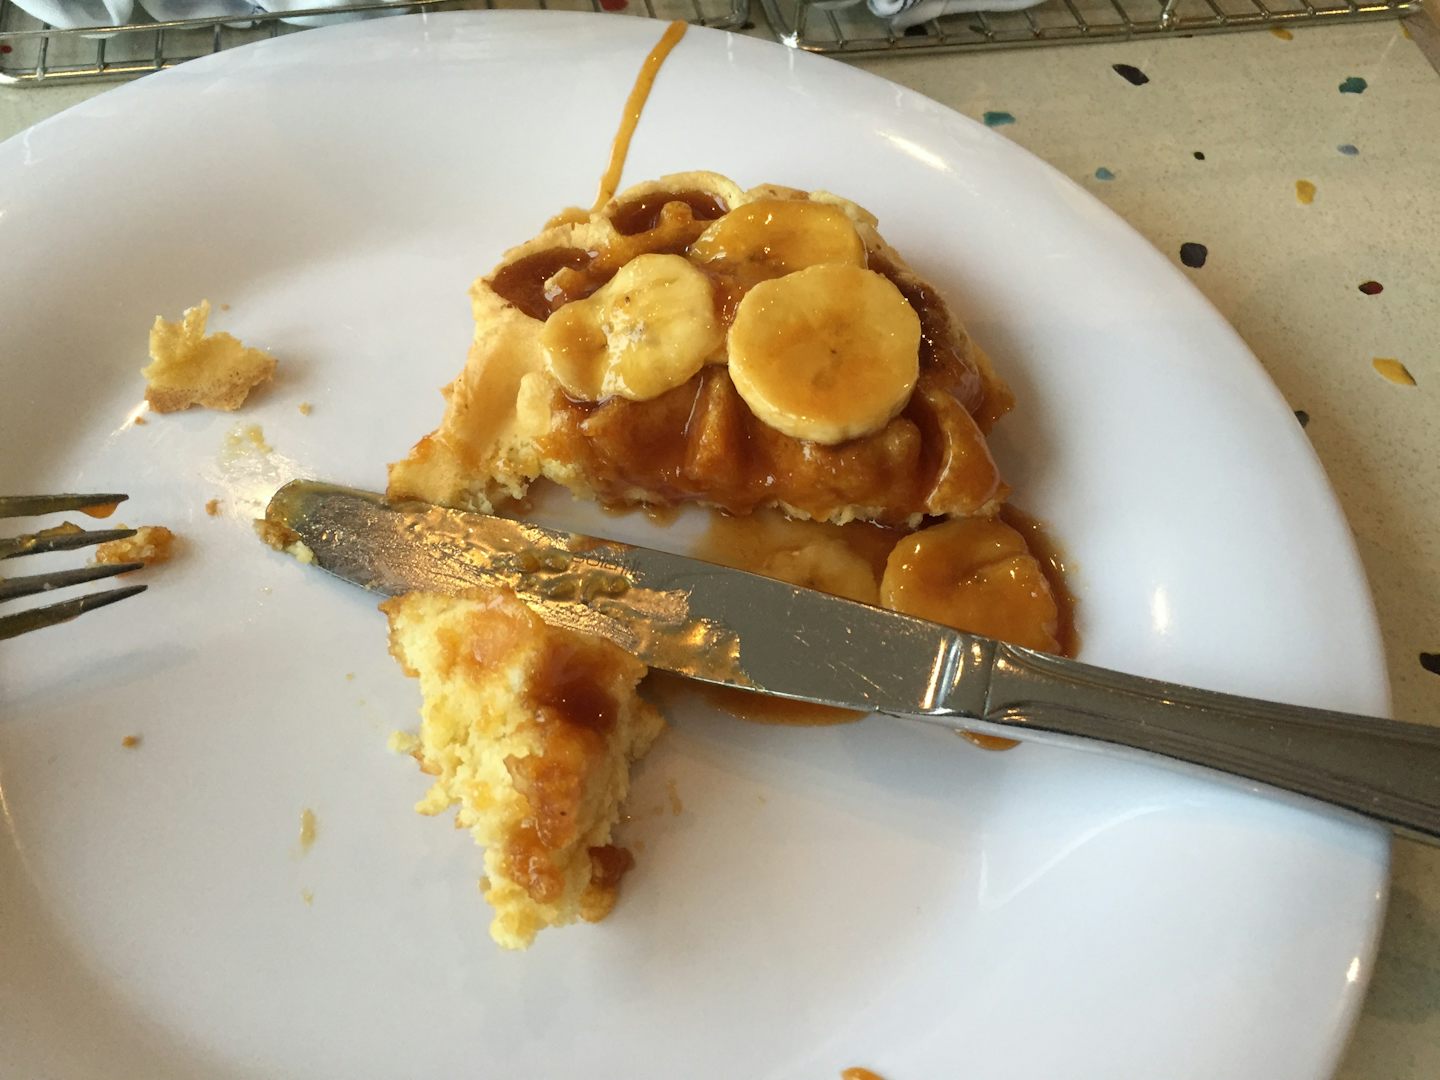 The waffle with bananas and I think it was caramel (been weeks since I ate